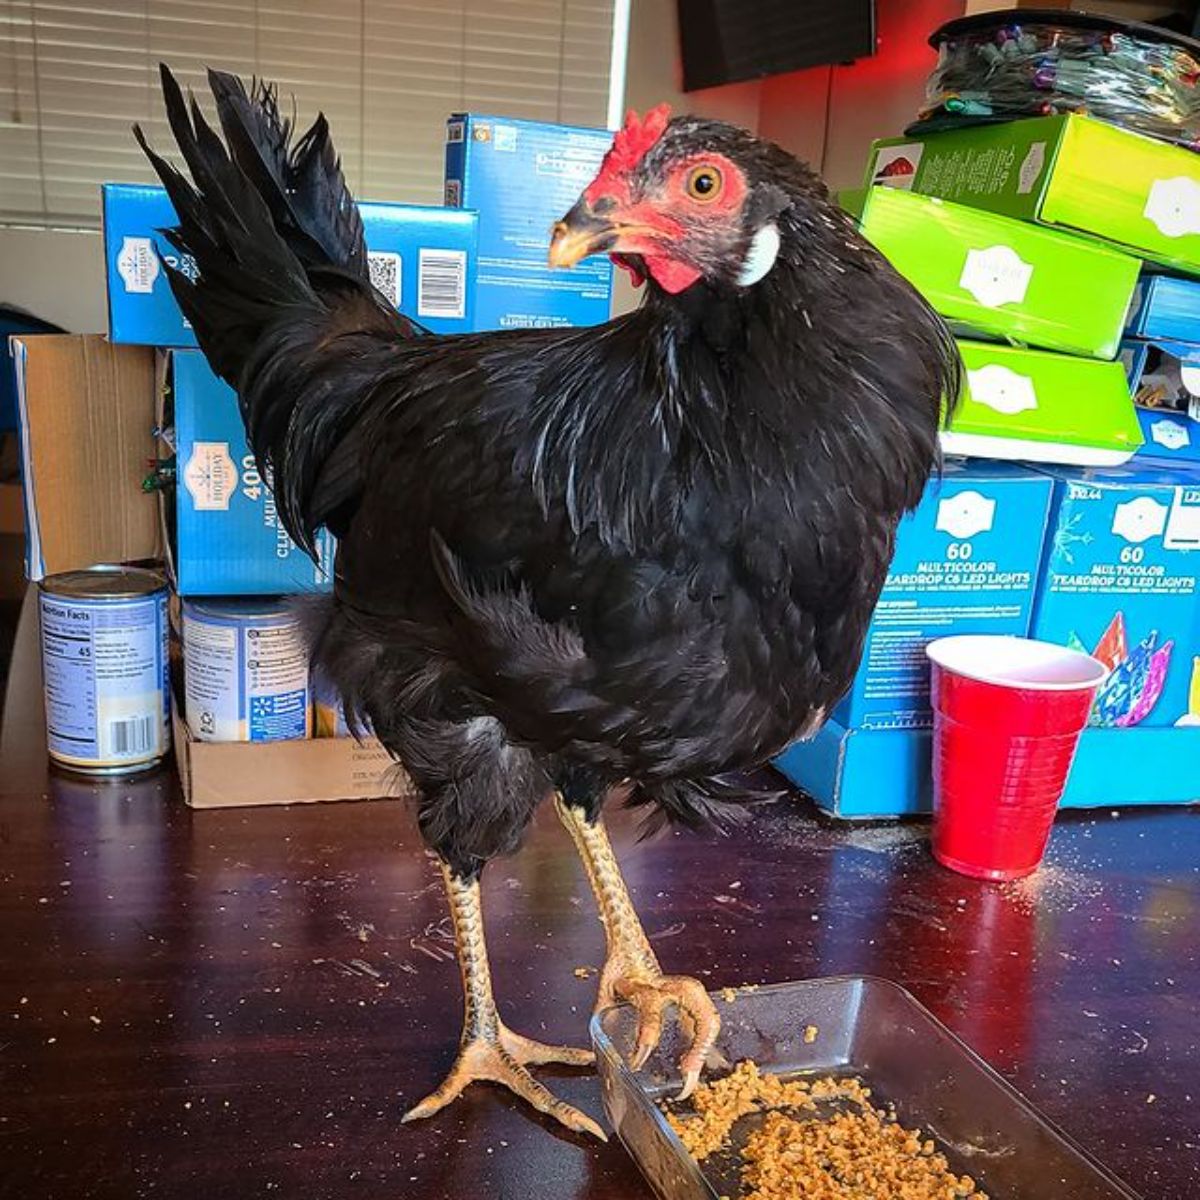 A Whiting True Blue rooster stands on a table.